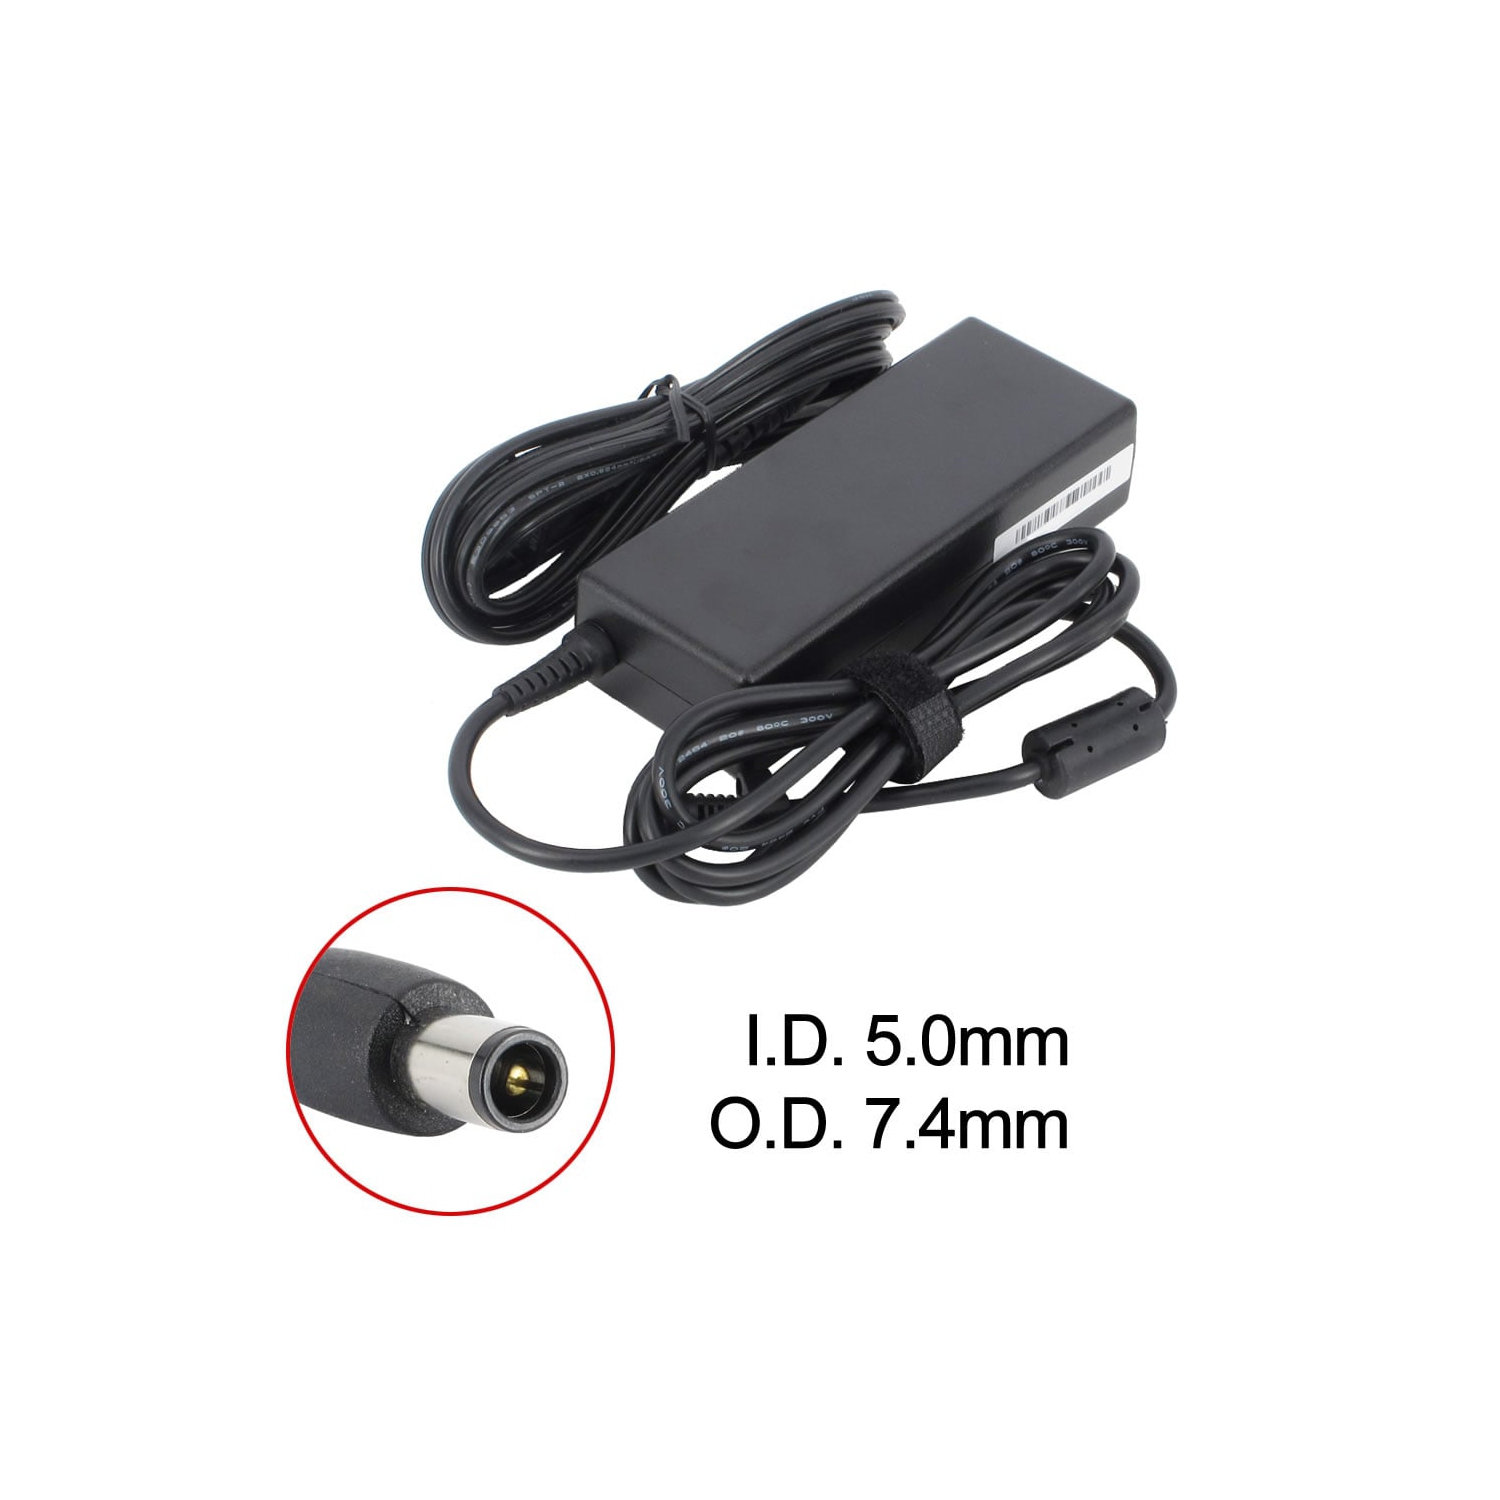 BATTDEPOT New Laptop AC Adapter for HP Pavilion g6-2250eo 409992-001 463554-001 609940-001 HP-AP091F13 LF SE PPP009L-E PPP009H